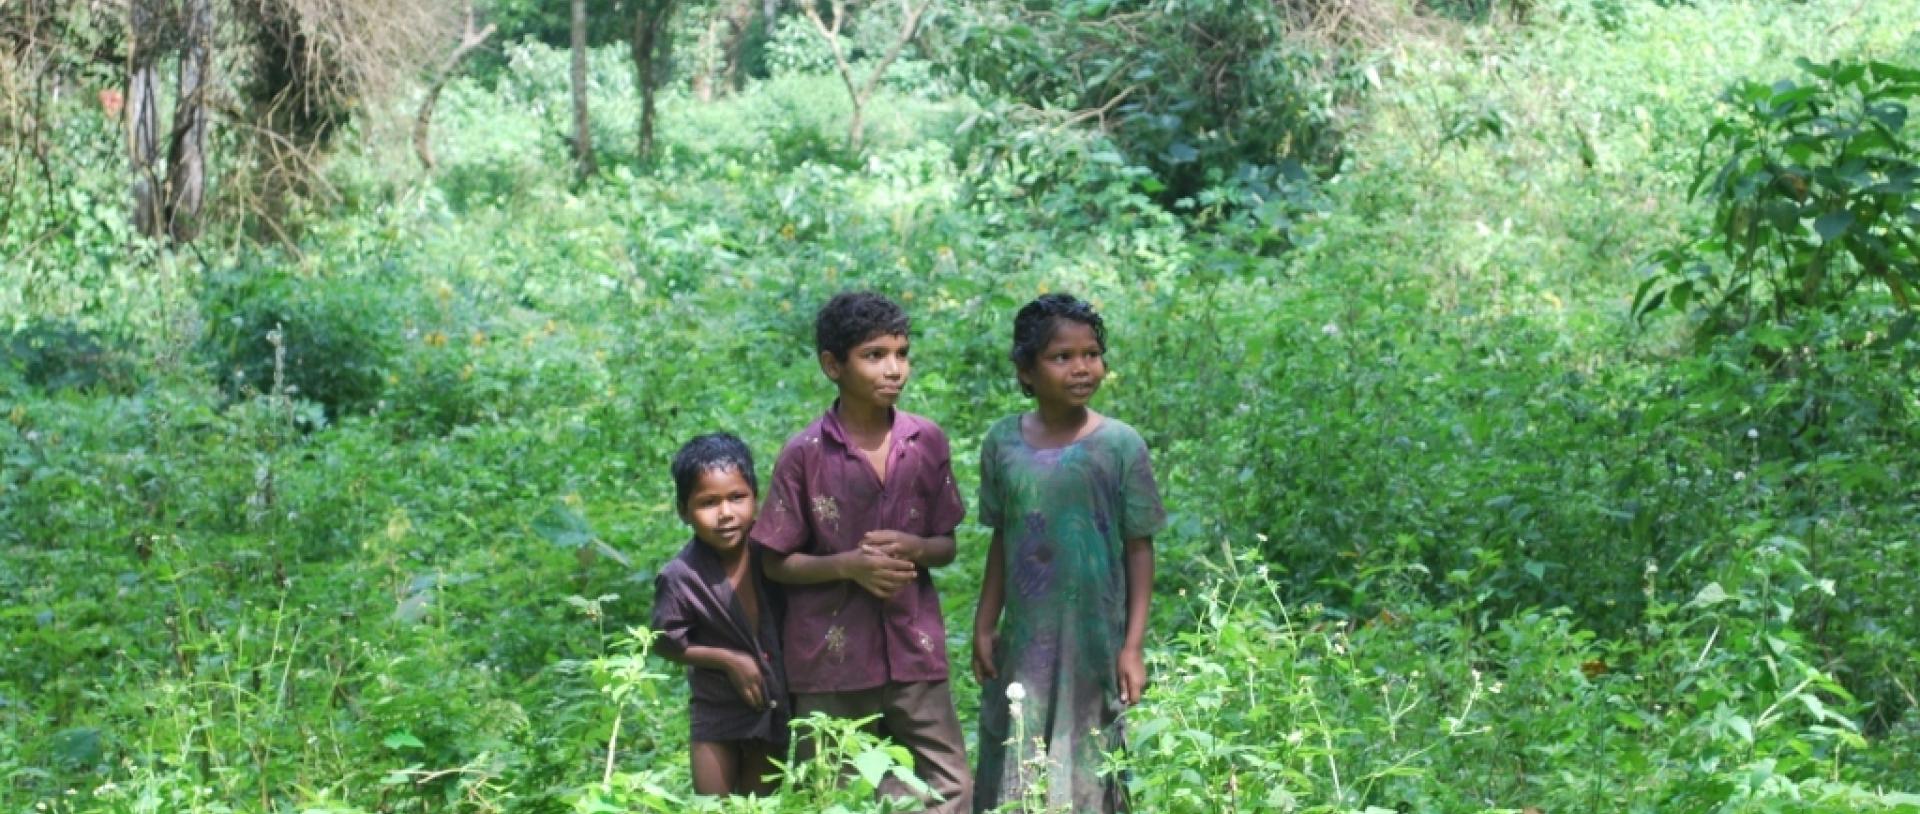 A group of children of the Soliga community. Photo: Ravikanth G